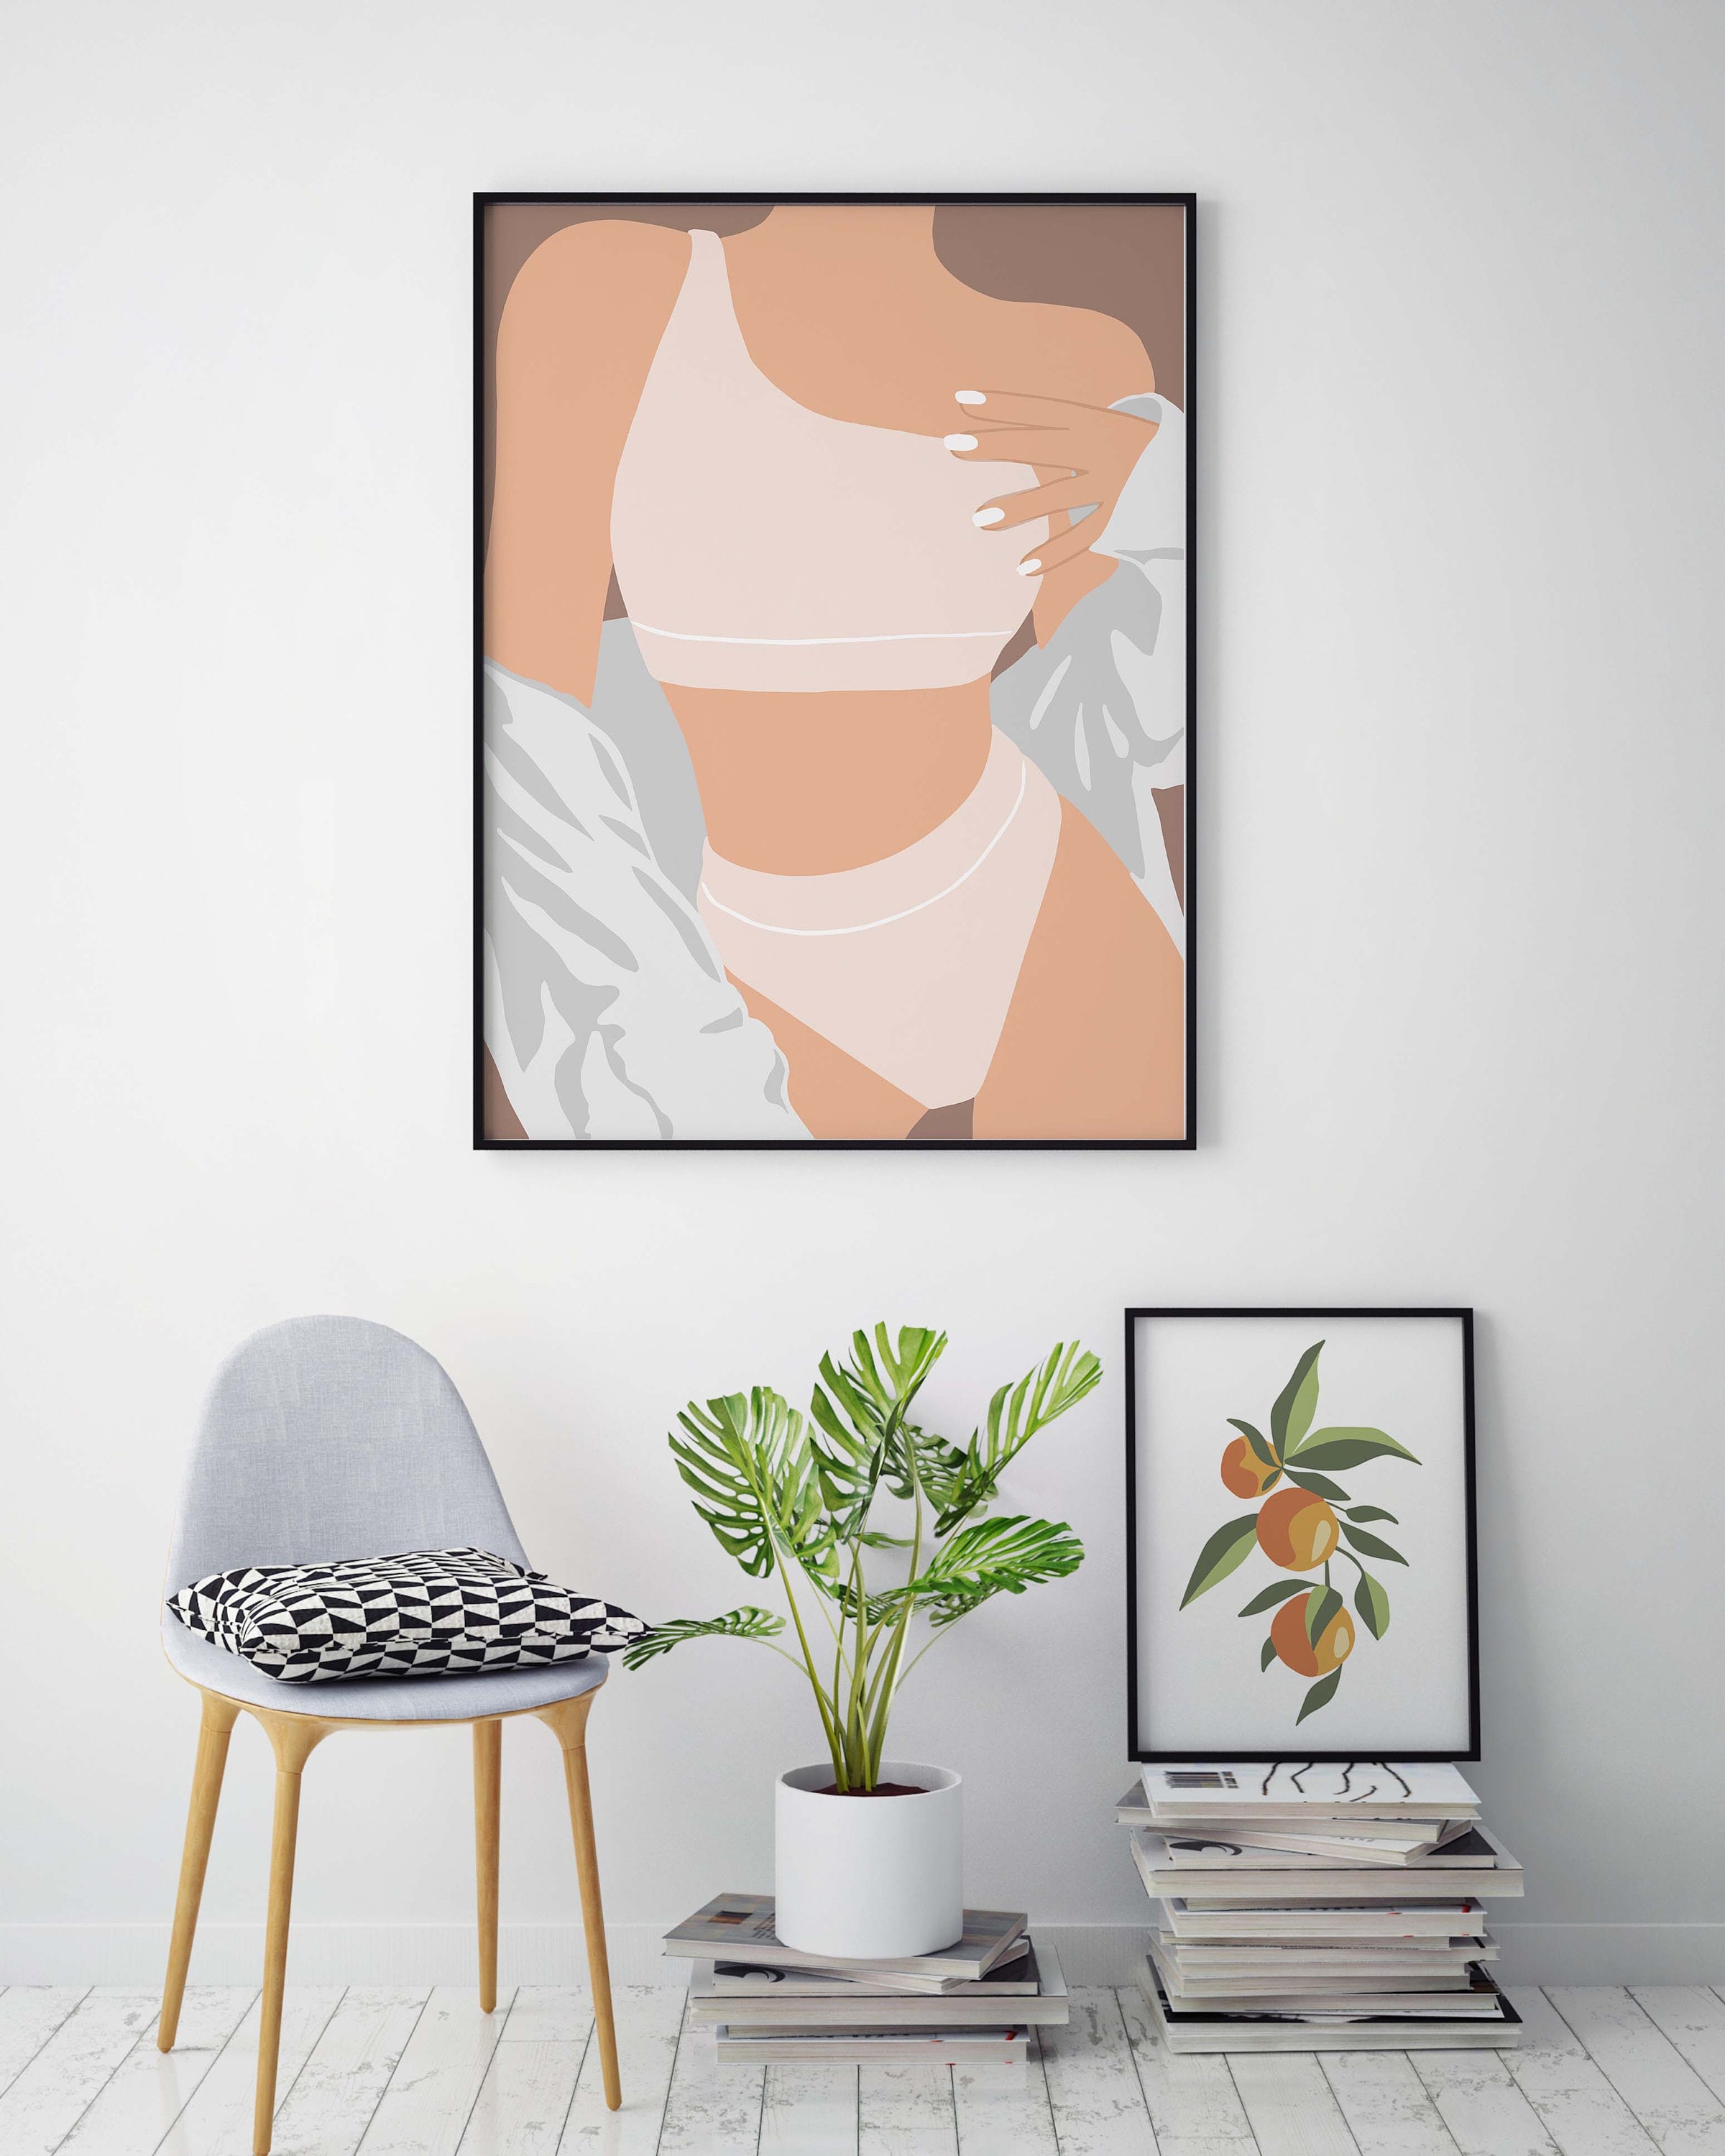 Young woman in very fancy underwear For sale as Framed Prints